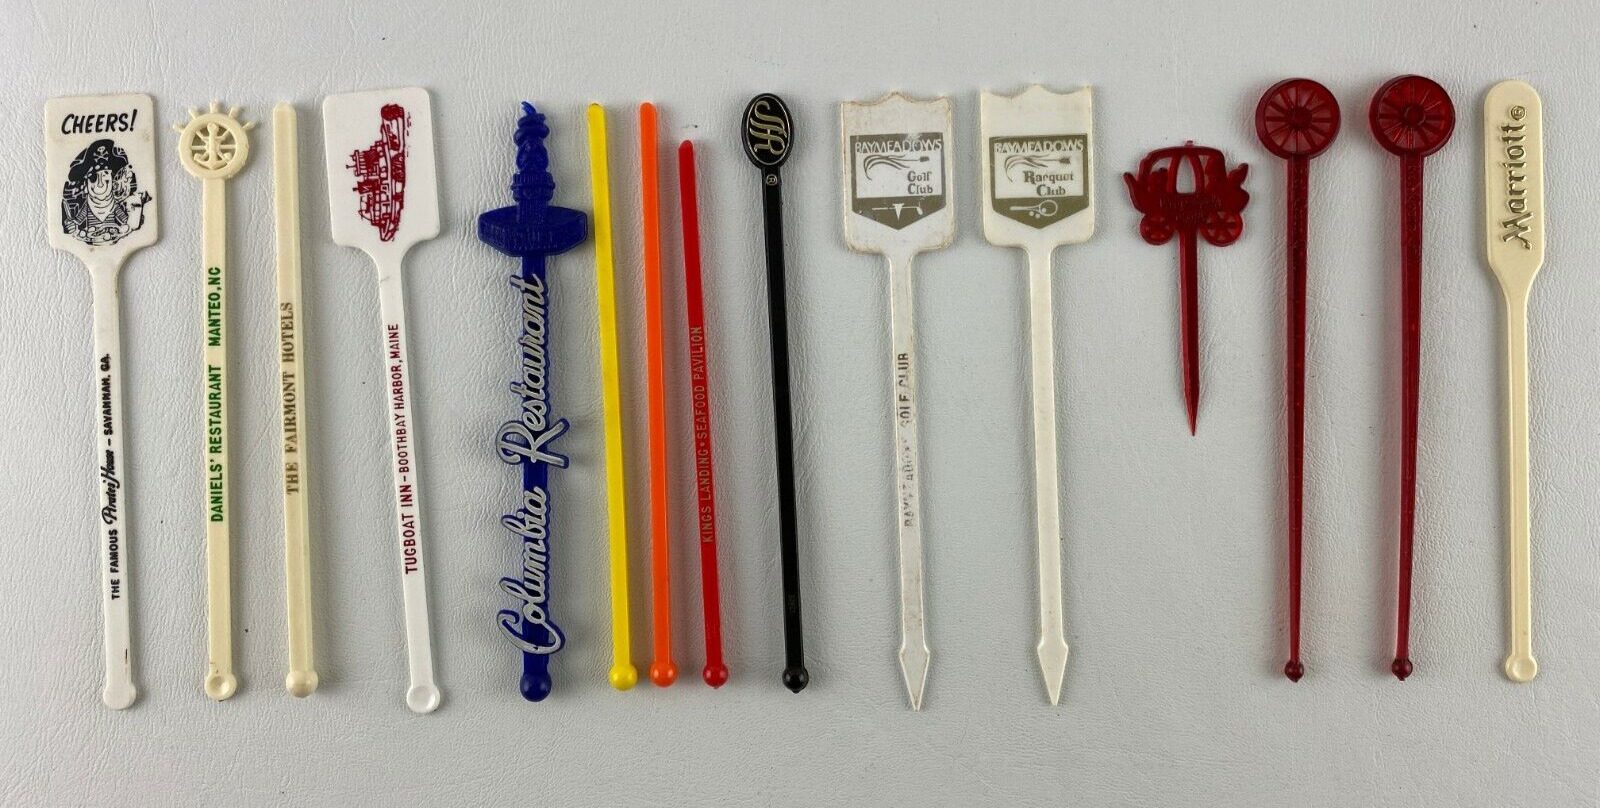 15 Vintage Swizzle Sticks Drink Stirs Collectible Mixed Lot, Restaurant, Hotels